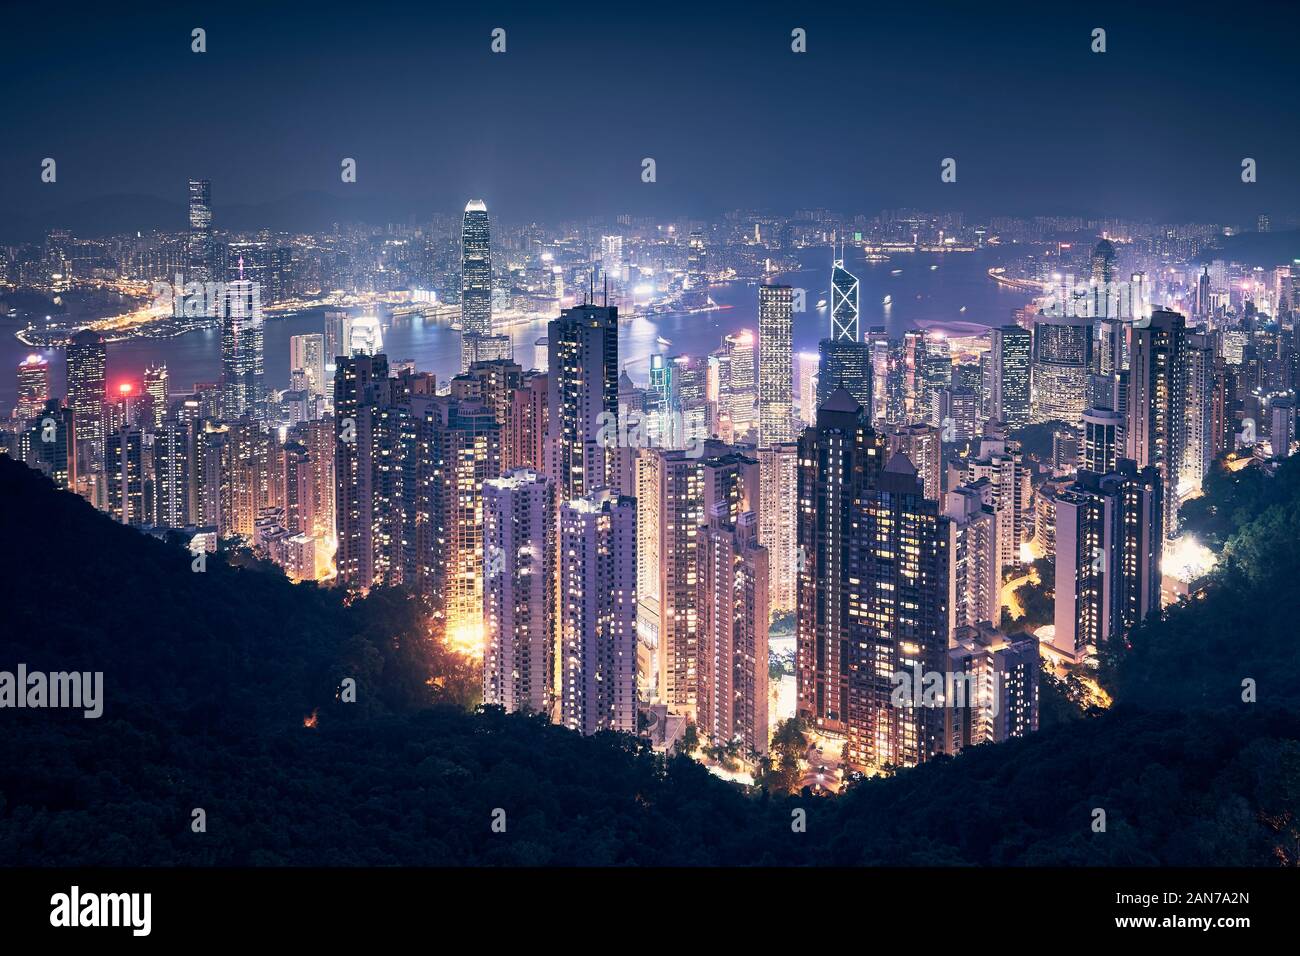 Hong Kong city skyline at night. Cityscape with skyscrapers against traffic in Victoria Harbour. Stock Photo